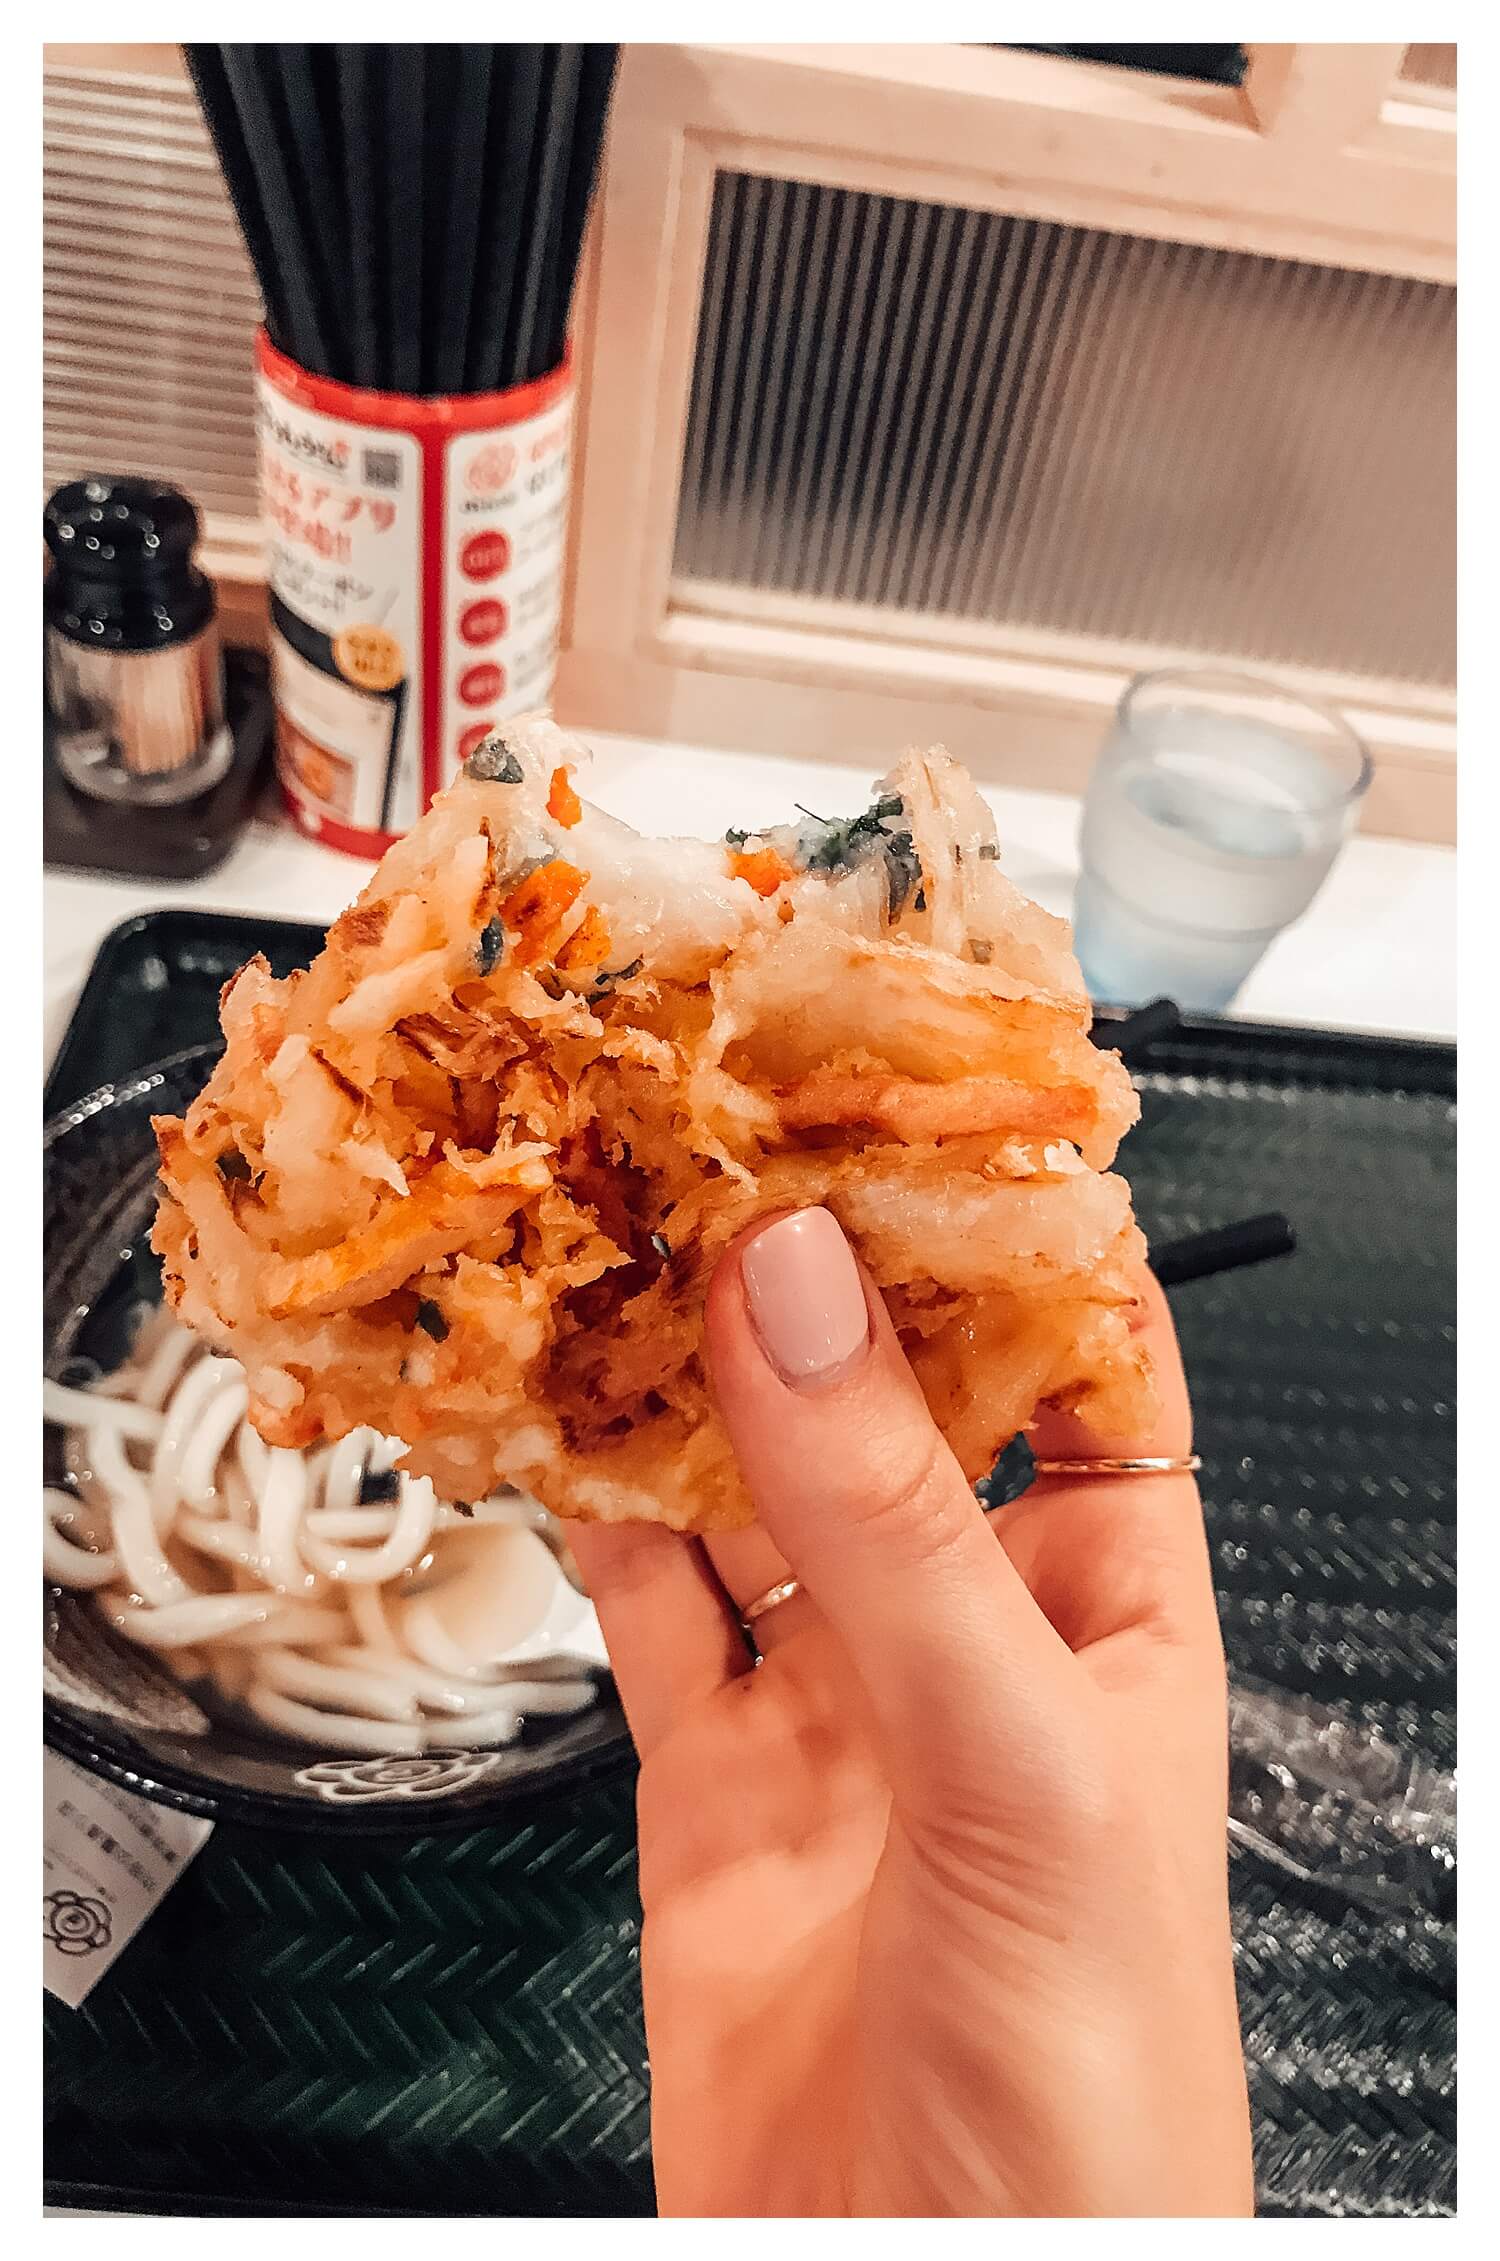 Tokyo food guide - my recommendations for restaurants and street food in the capital of Japan. The best ramen place, sushi, Japanese BBQ, westeren food and sweets!!